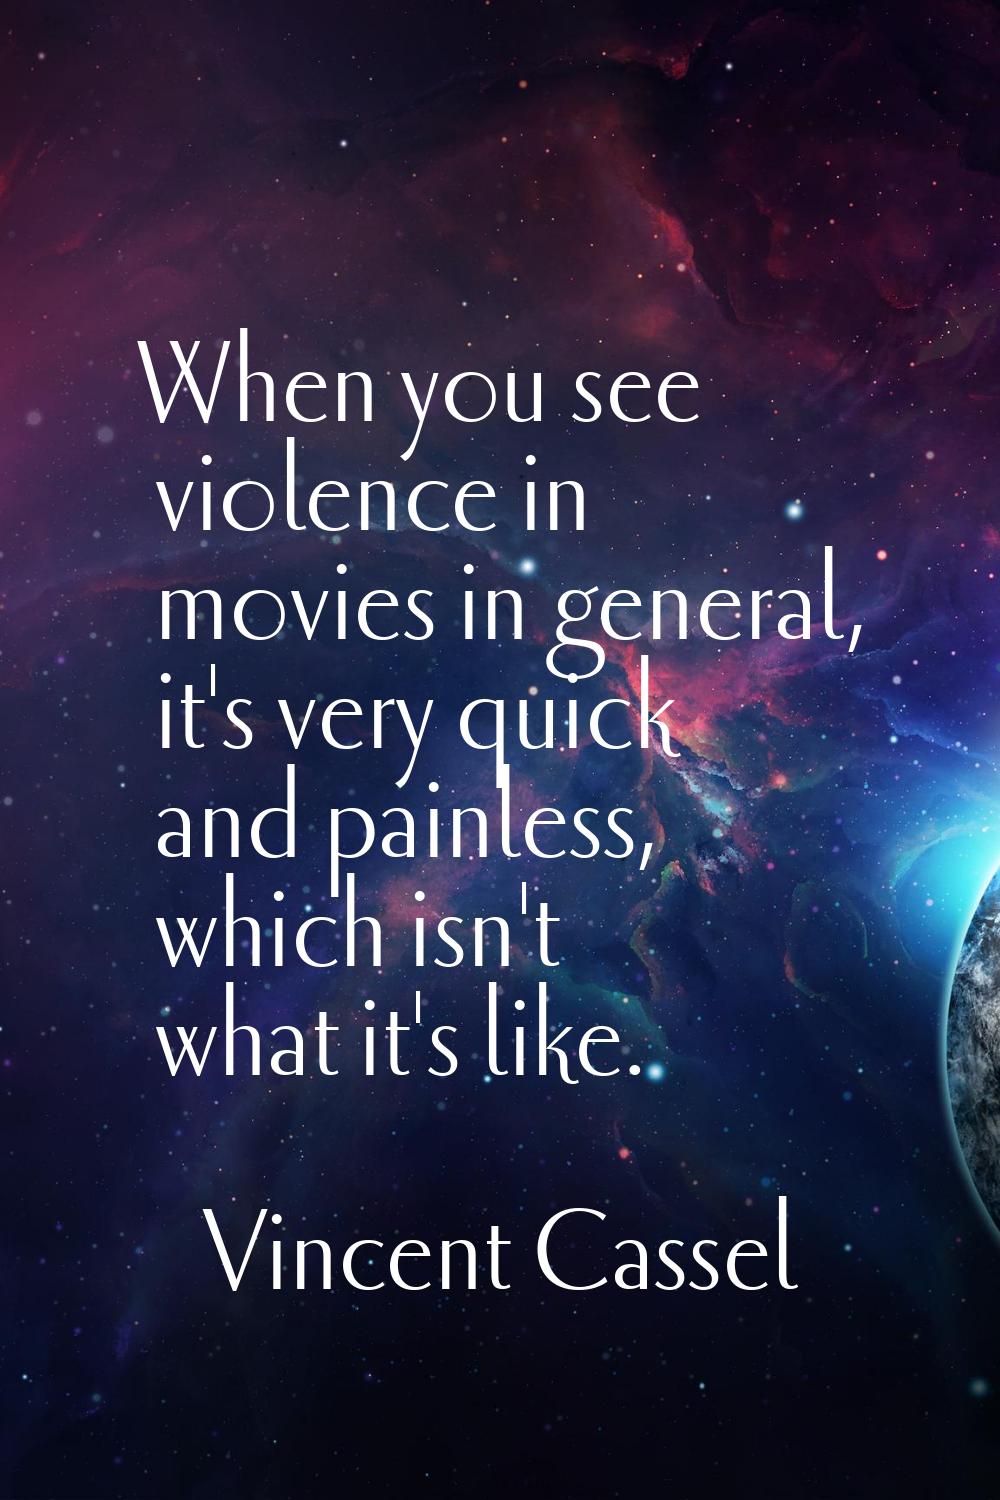 When you see violence in movies in general, it's very quick and painless, which isn't what it's lik